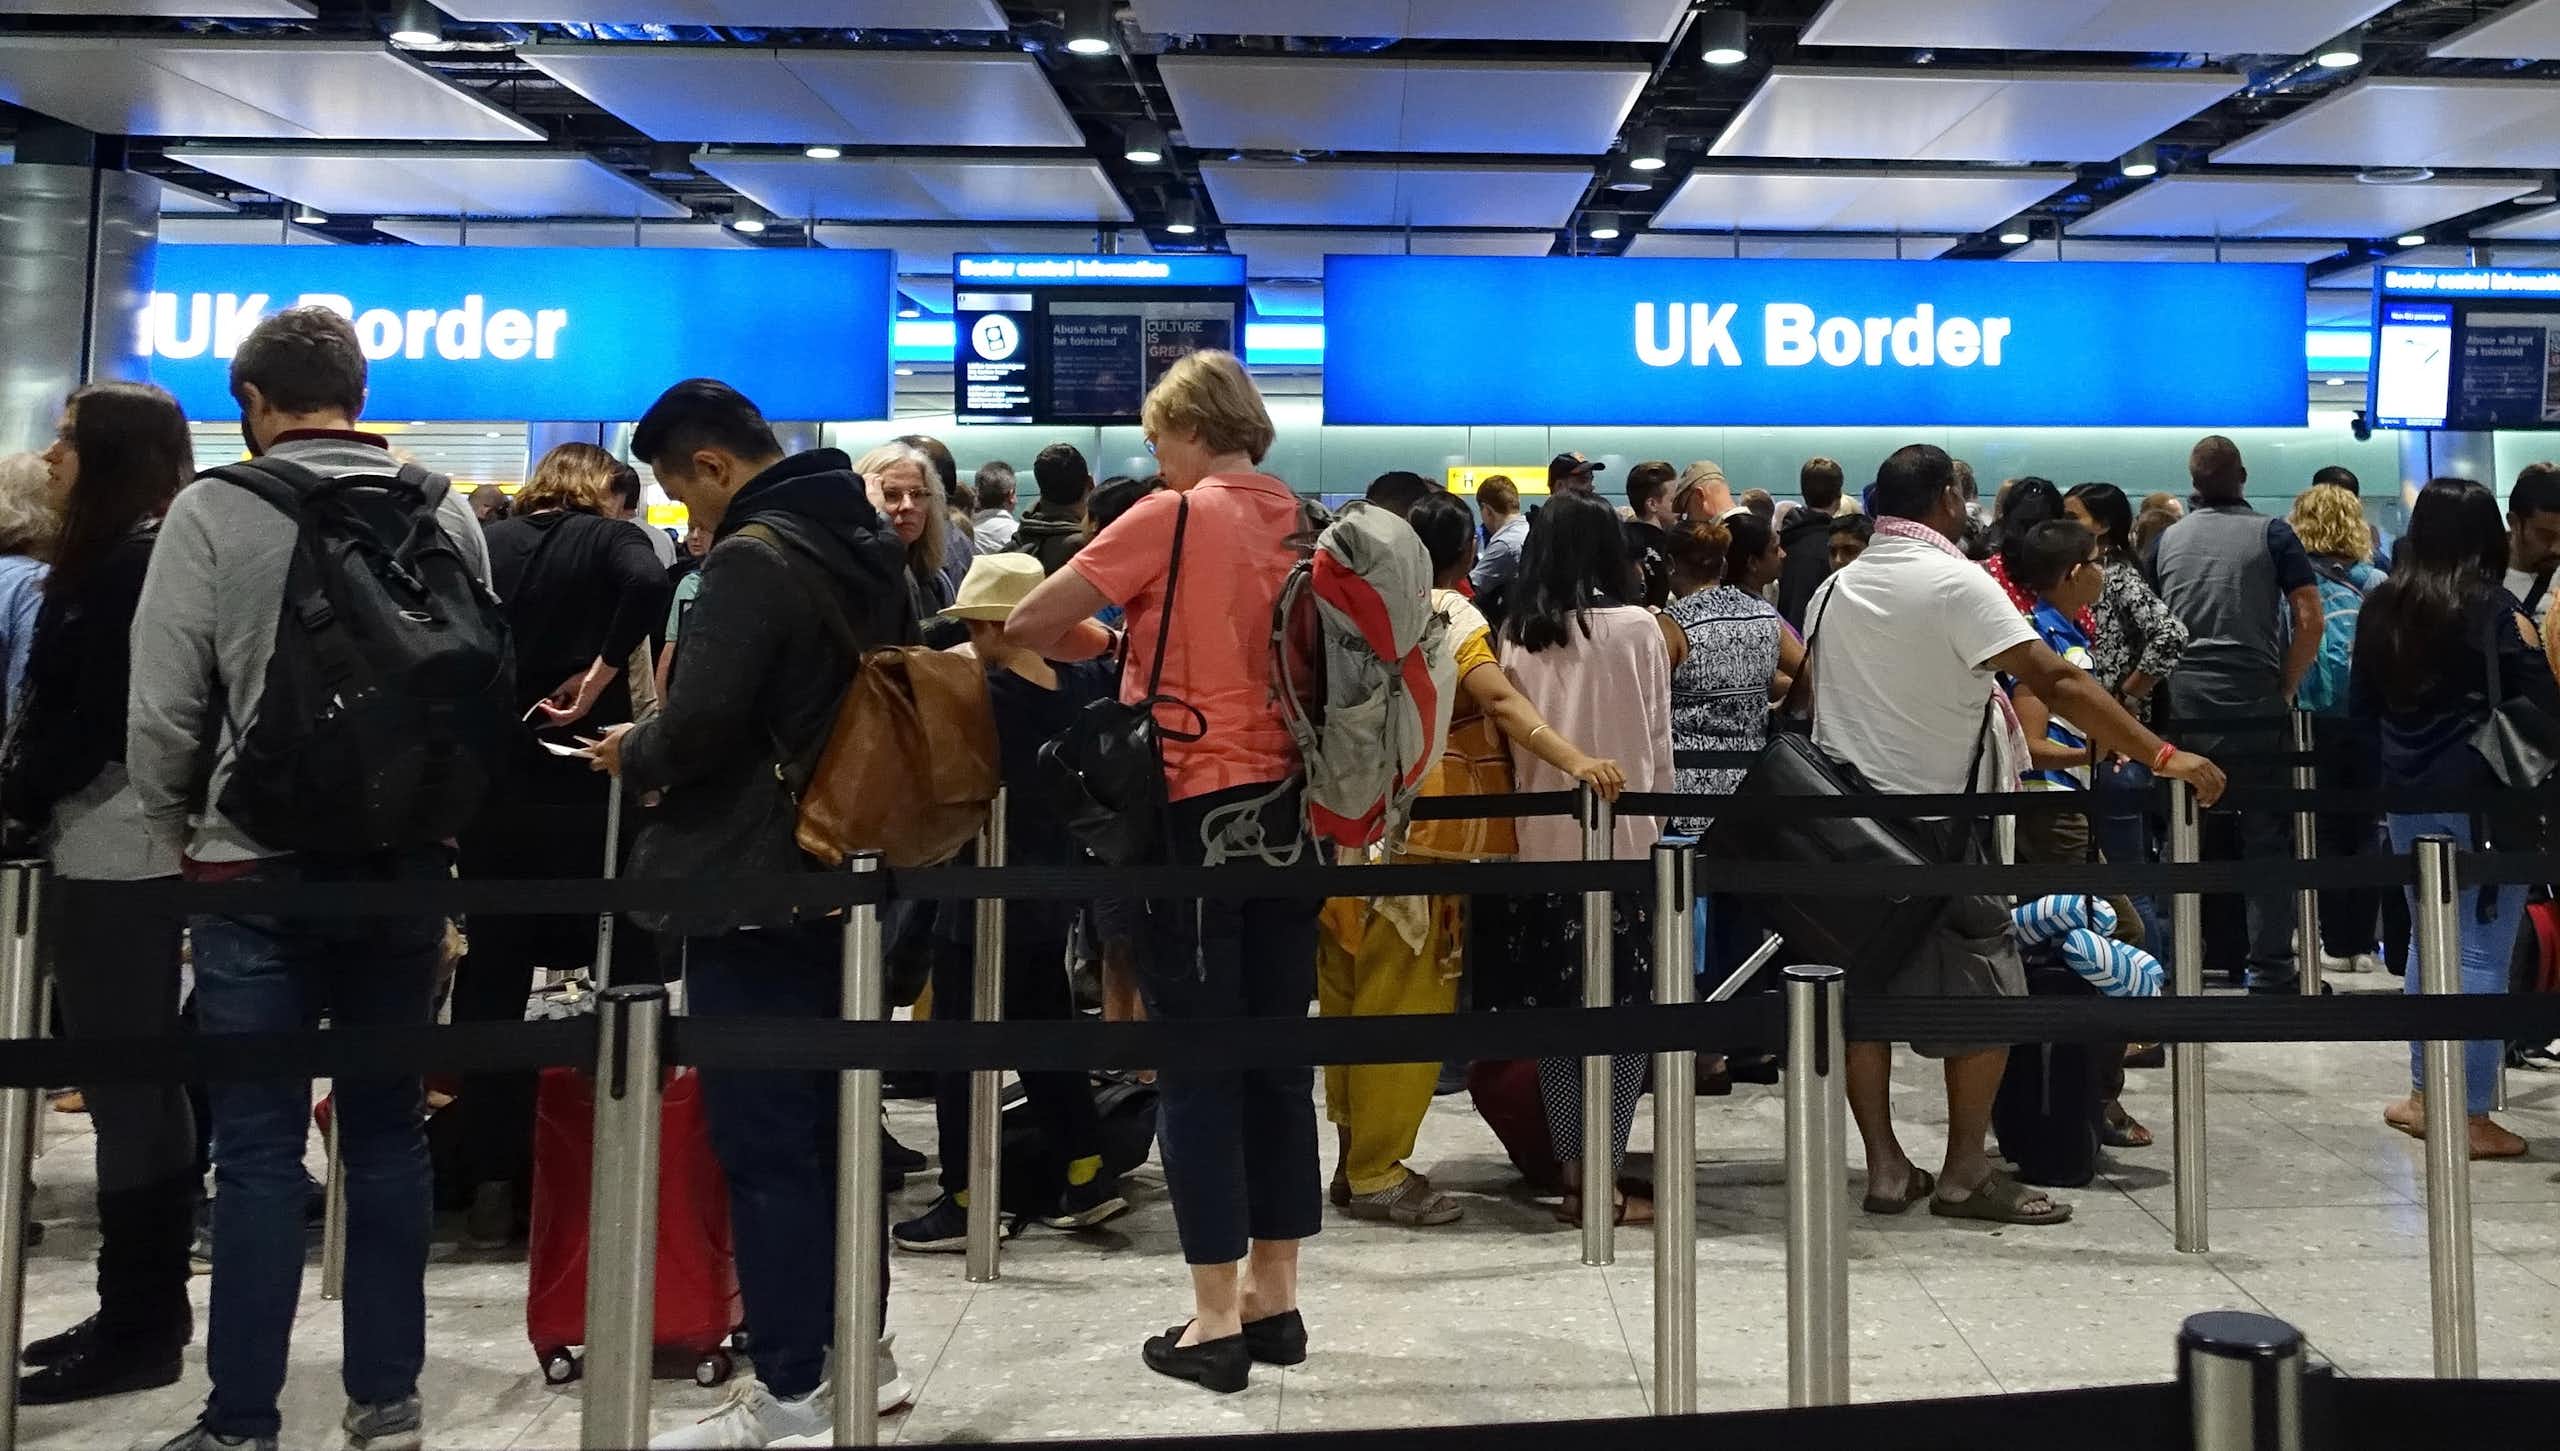 Photo of queues of travelers lining up at the glowing blue UK border sign in an airport